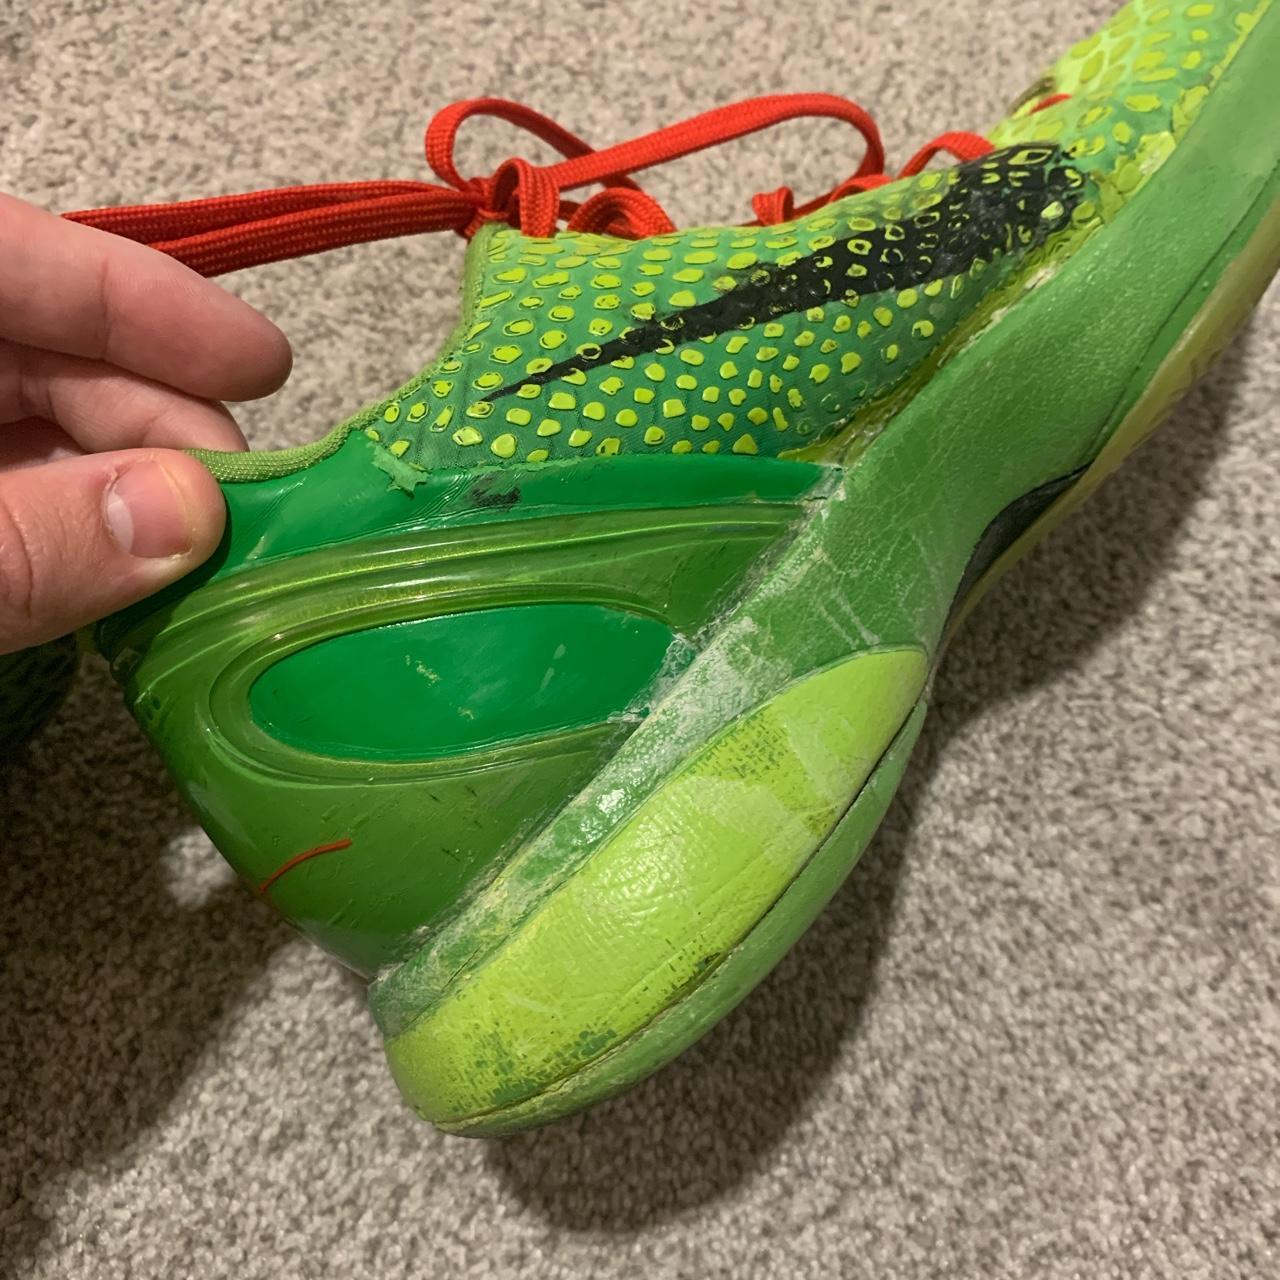 Kobe 6 GRINCHES. These are the 2010 version not the... - Depop